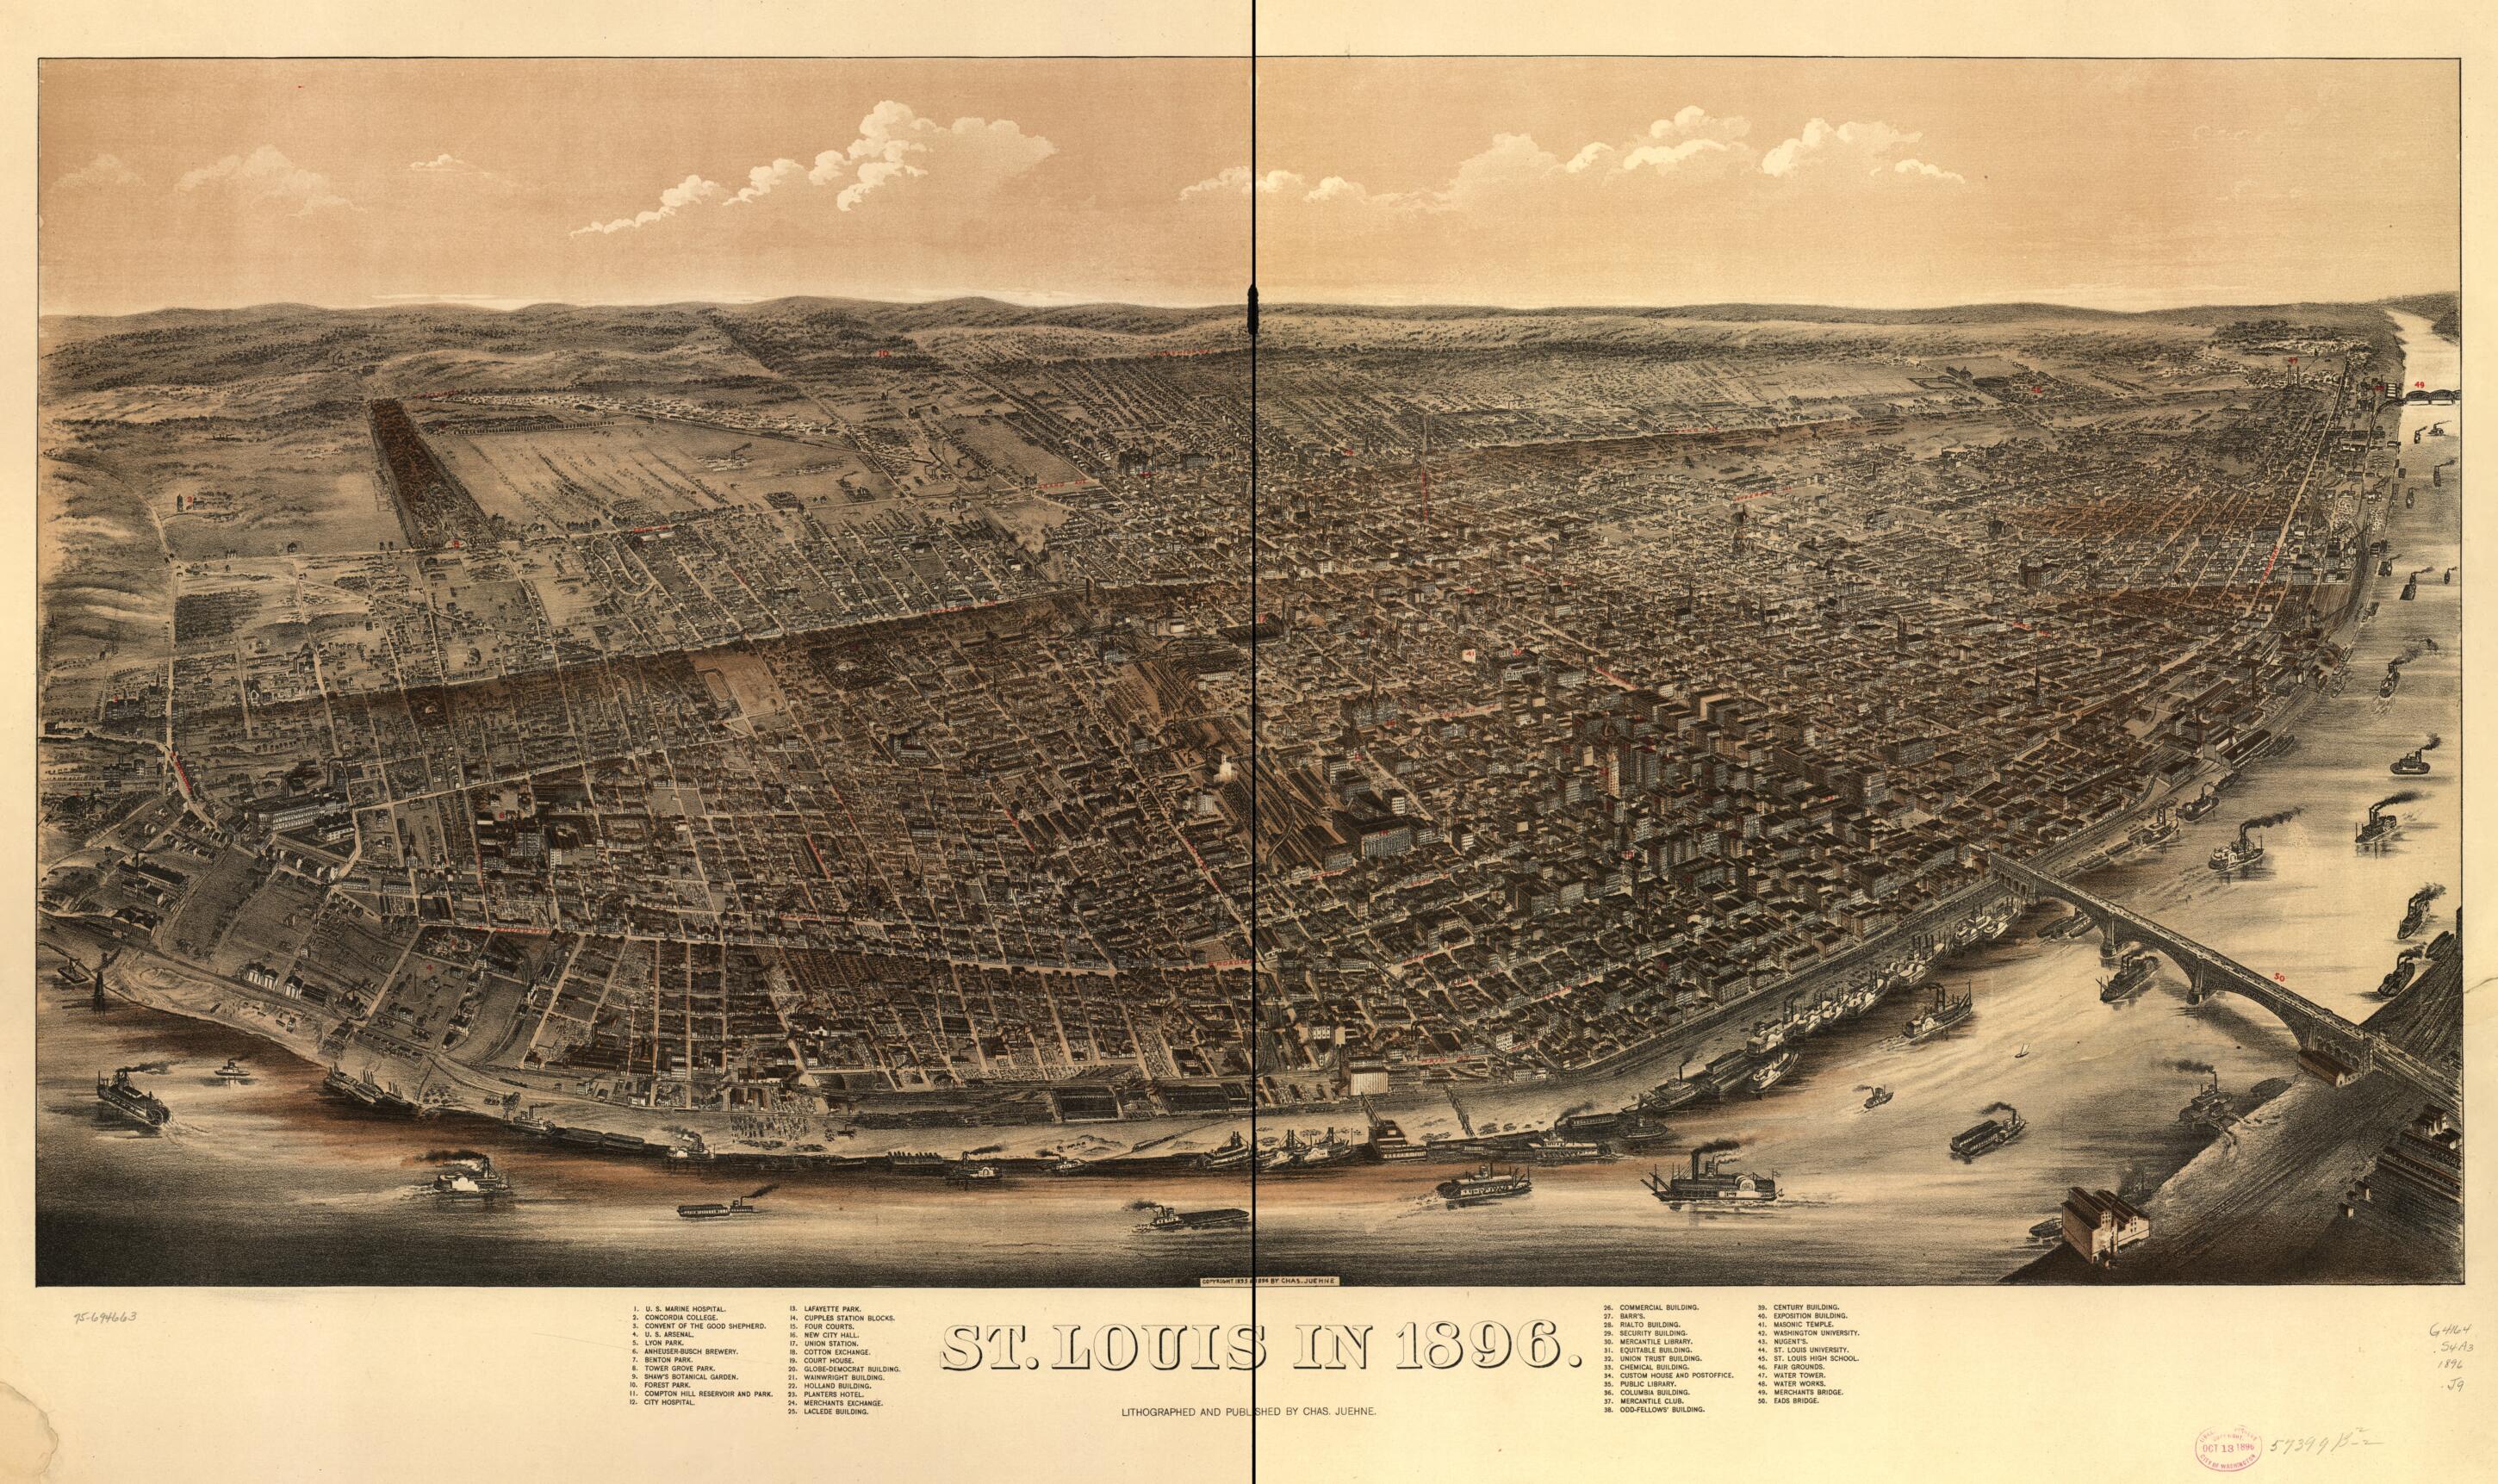 This old map of St. Louis In from 1896 was created by Charles Juehne in 1896